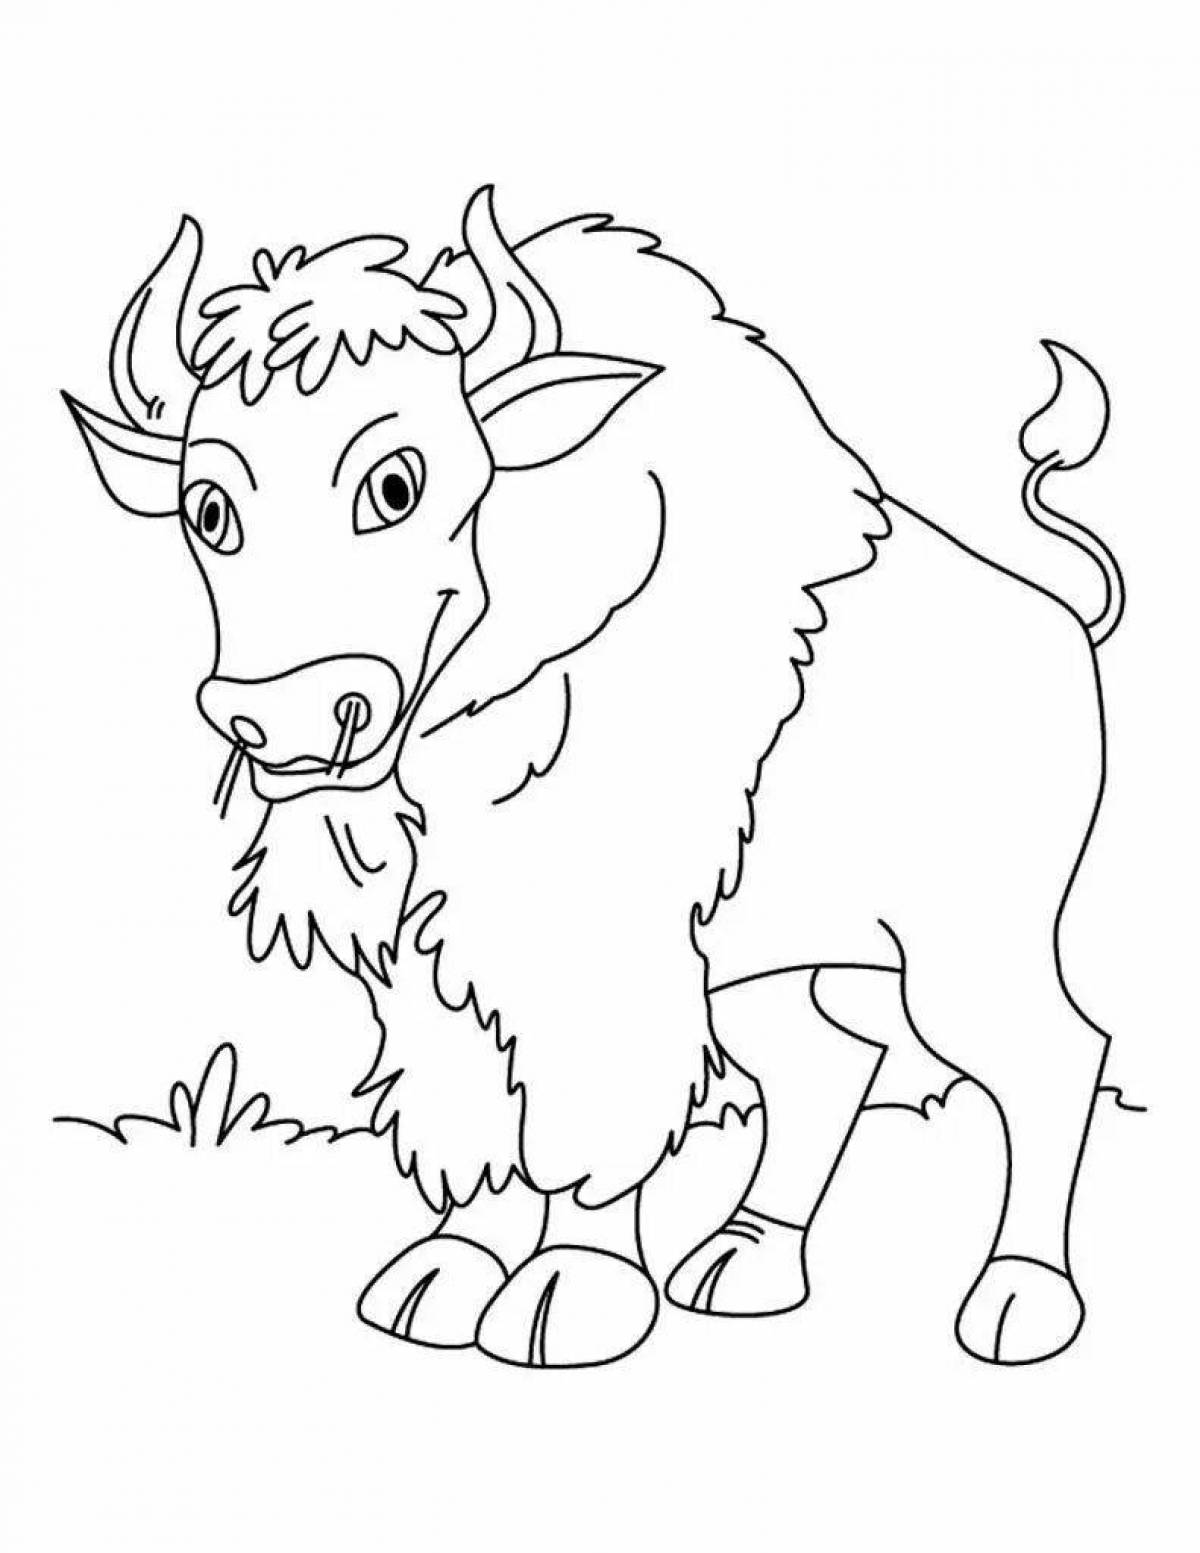 Exquisite bison figurine coloring page